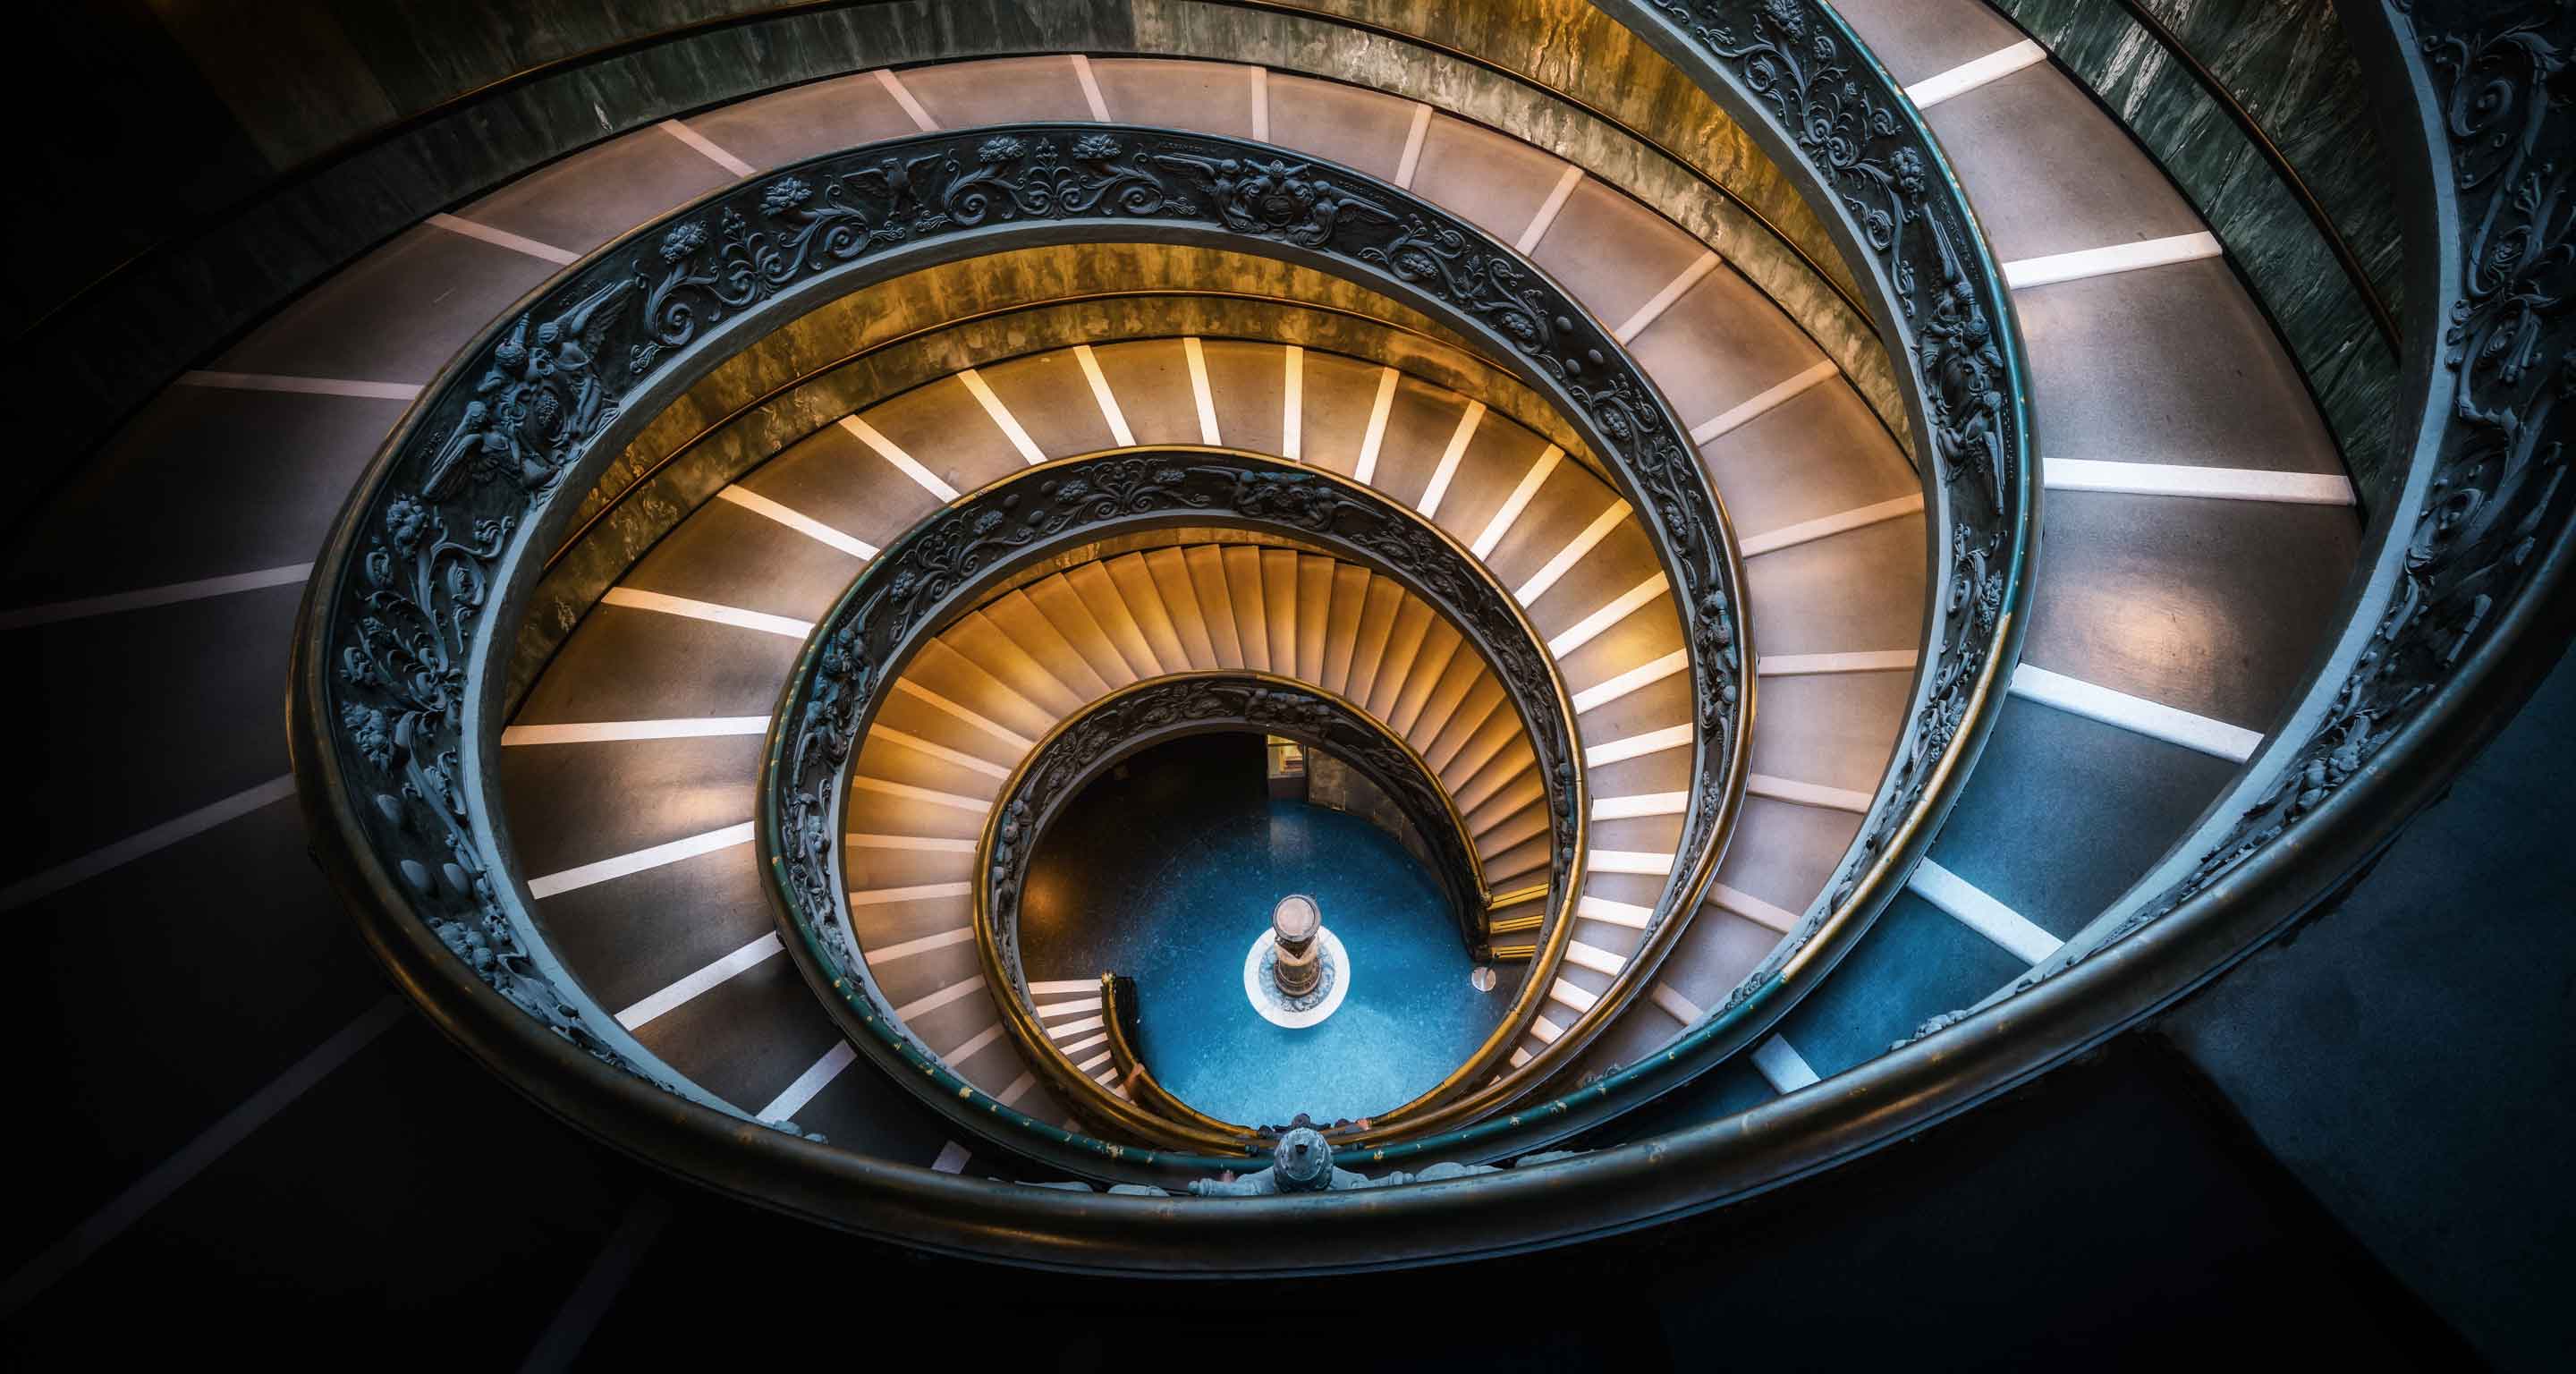 The Bramante Staircase in Vatican City.